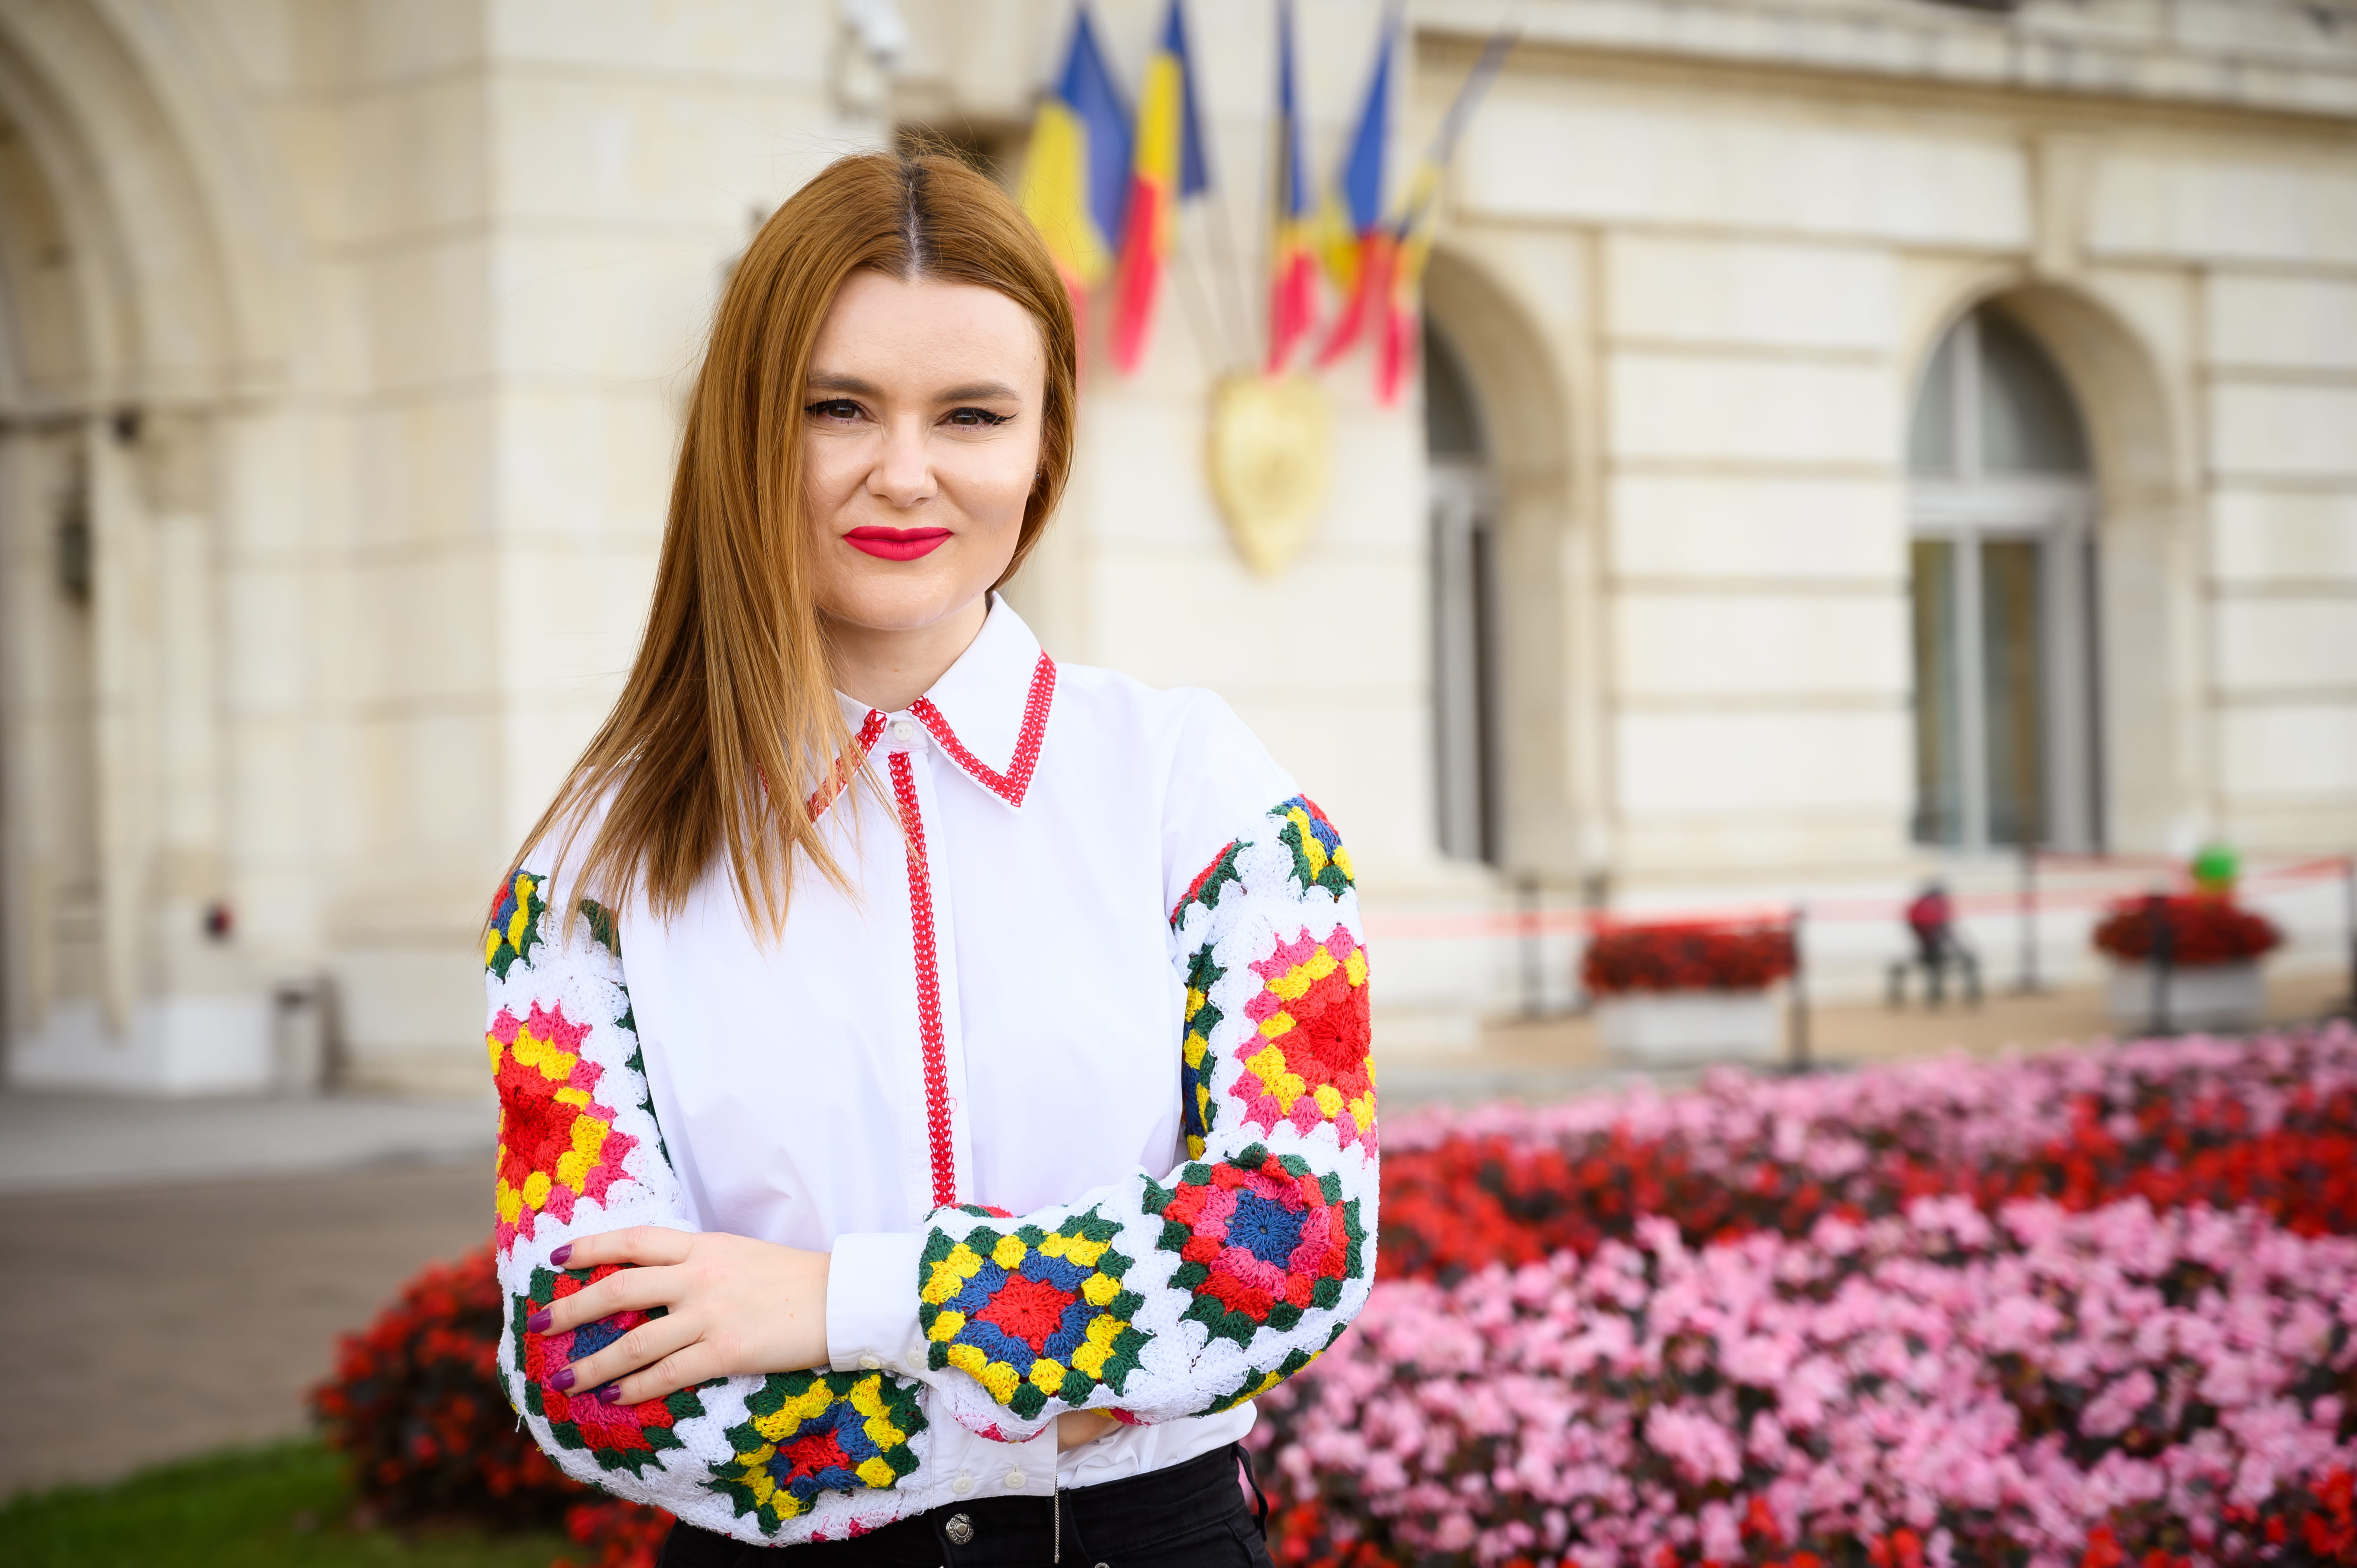 simina wearing a white shirt with colourful sleeves, stood in front of an official building with the Romanian flags flying. 